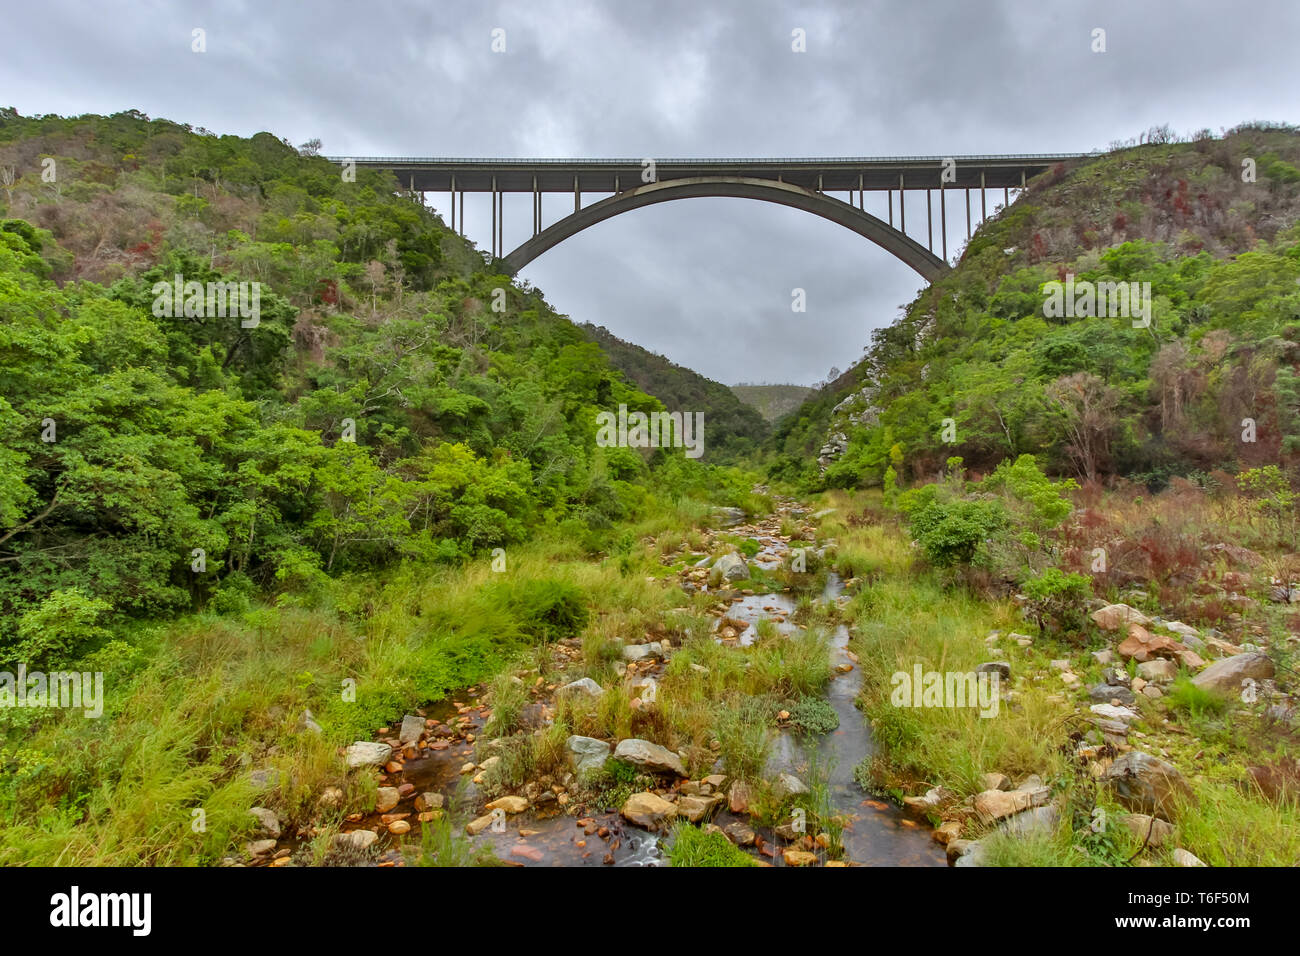 Bridge with the river flowing below Stock Photo